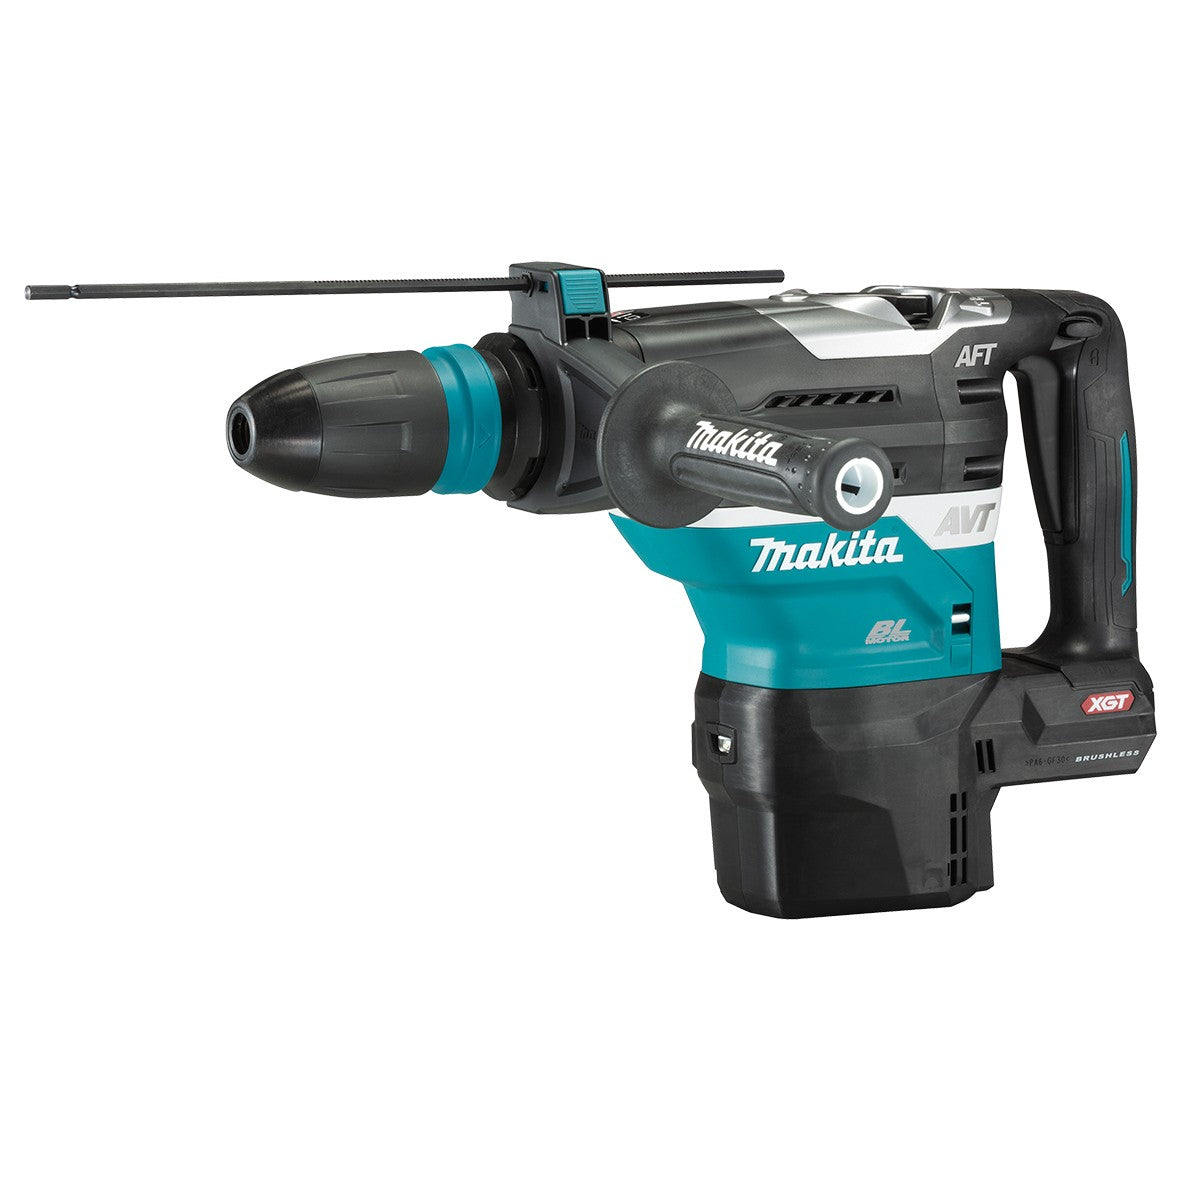 40V 40mm Brushless SDS Max Rotary Hammer Bare (Tool Only) HR005GZ by Makita